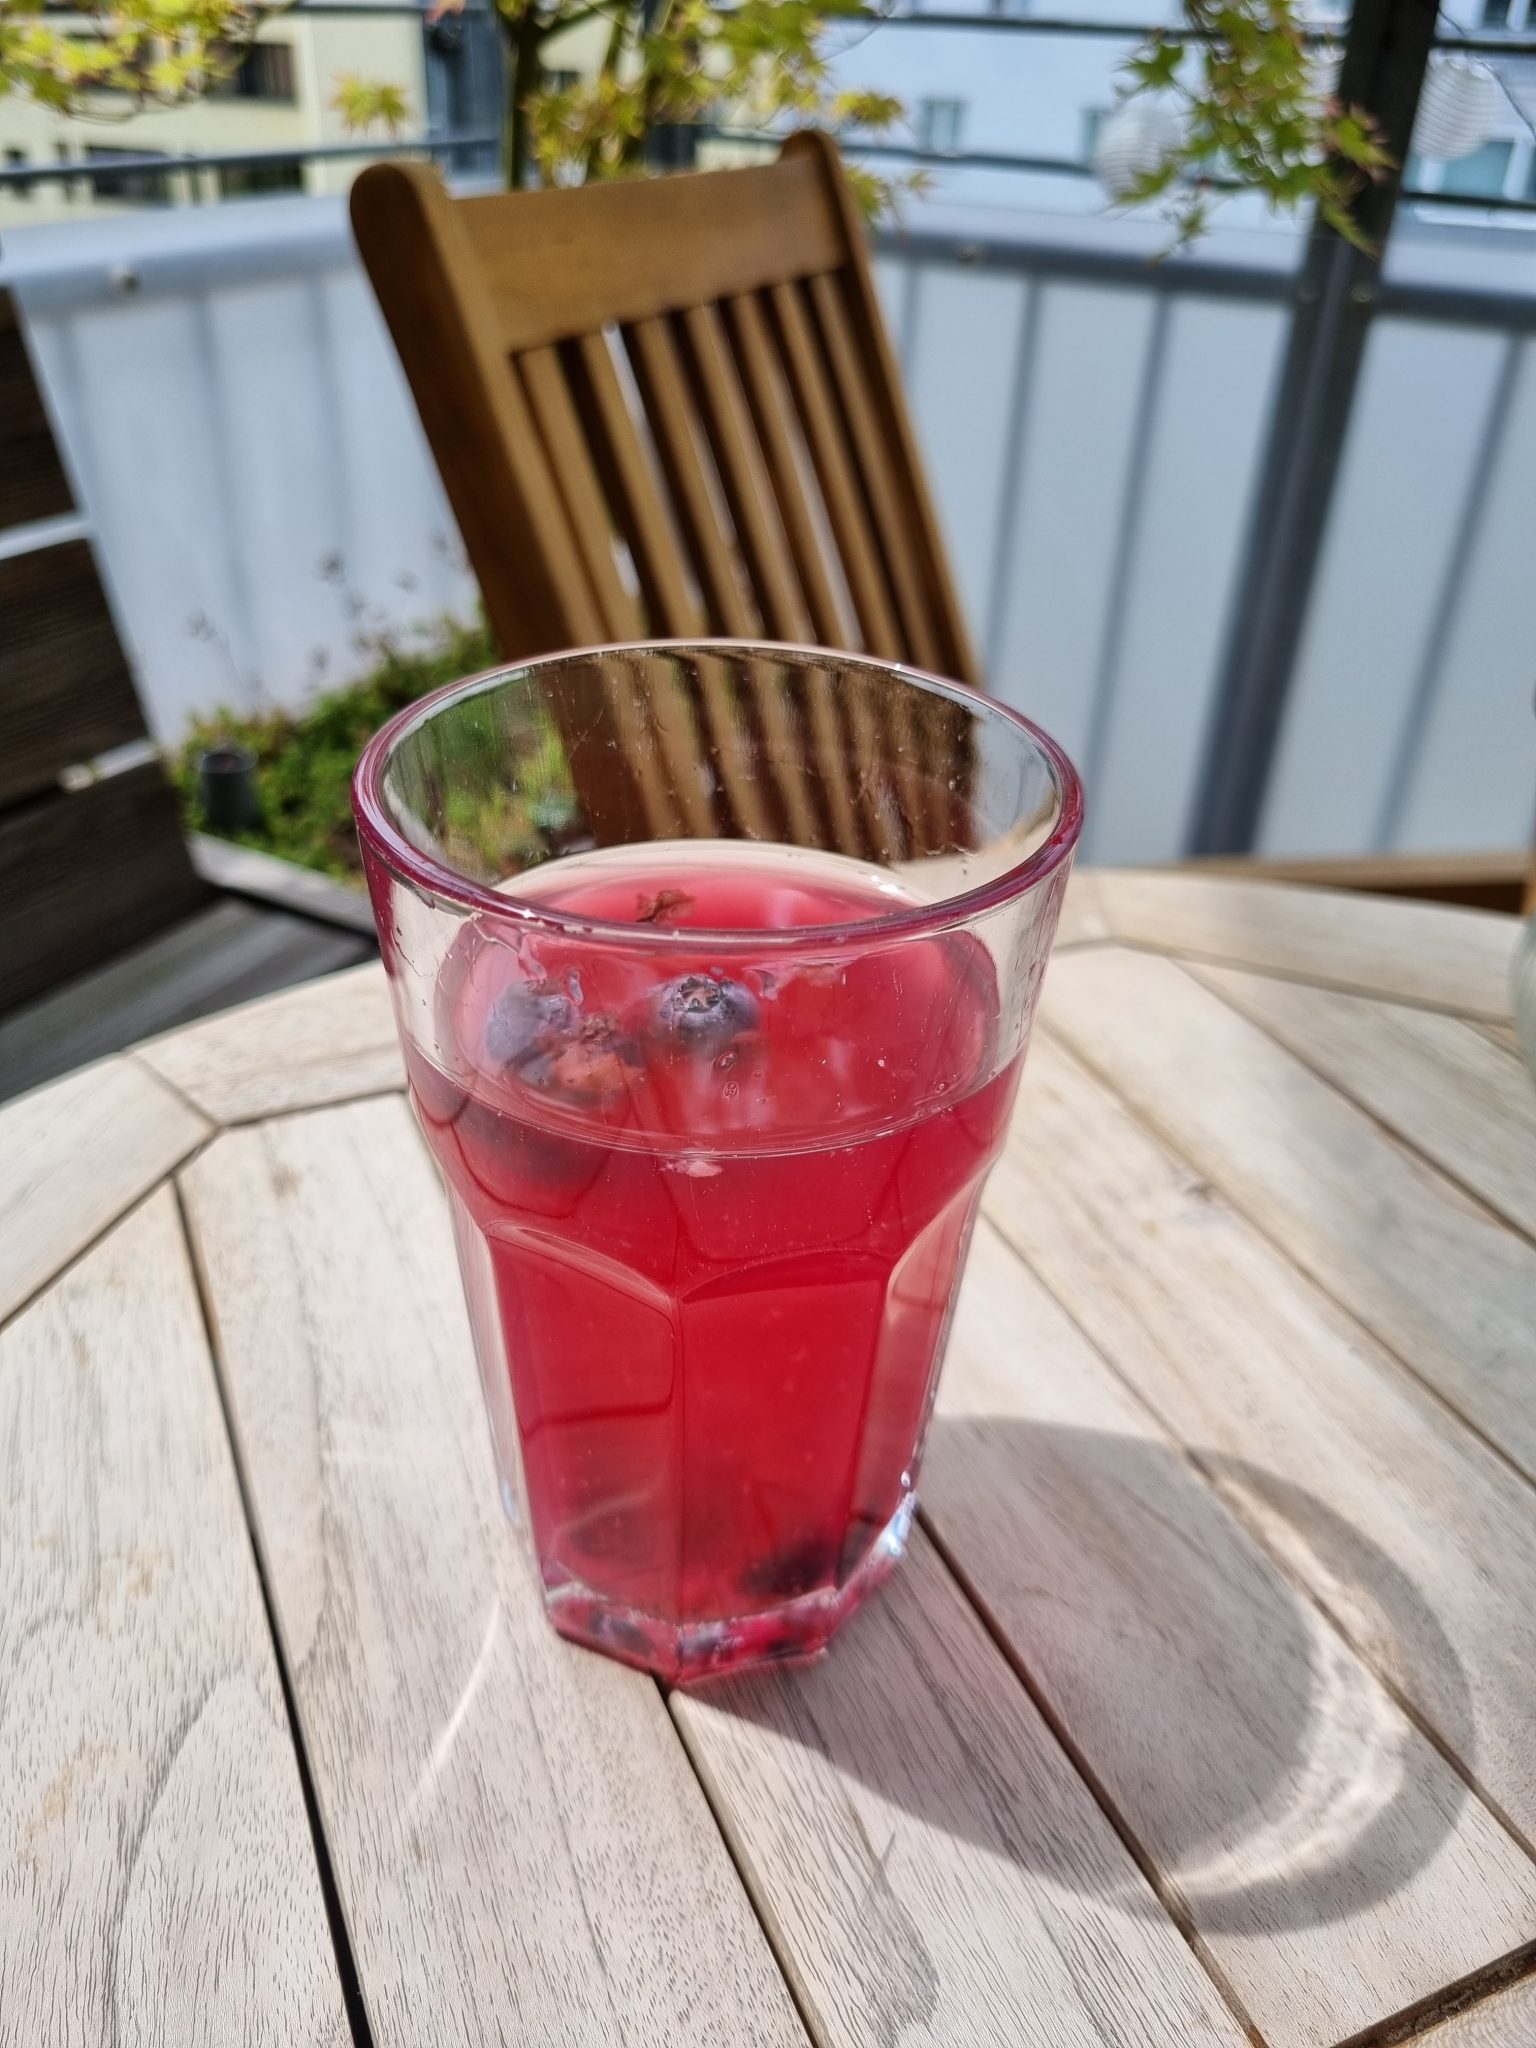 A glass full with bright magenta homebrew kombucha with blueberries in it standing on a wooden table on a balcony.